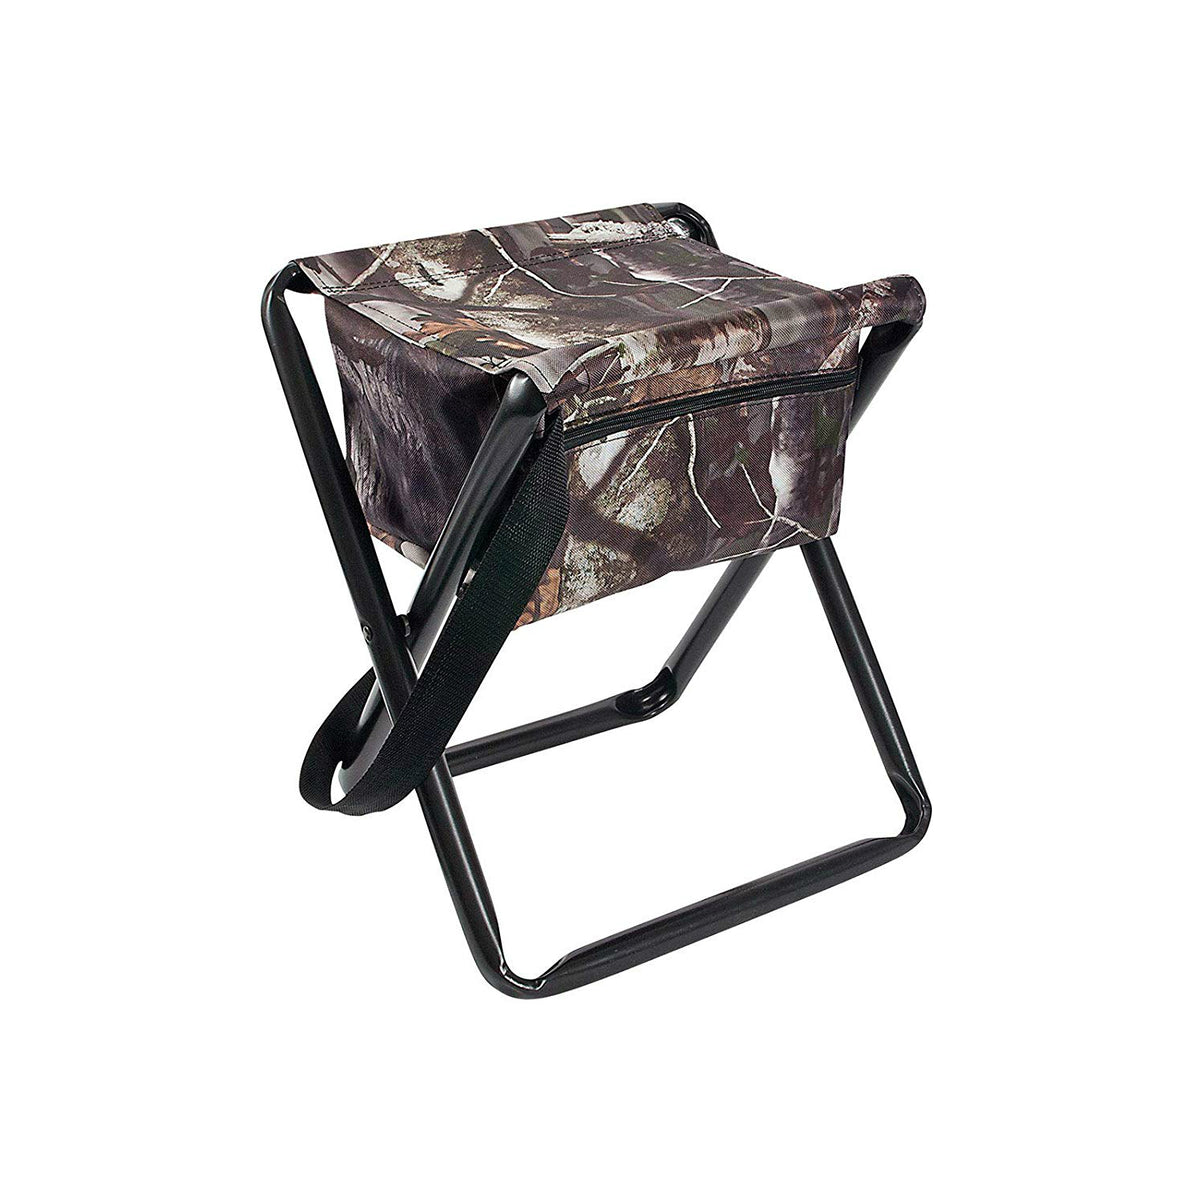 Allen 5853 Collapsible Folding Stool with Tripod Legs